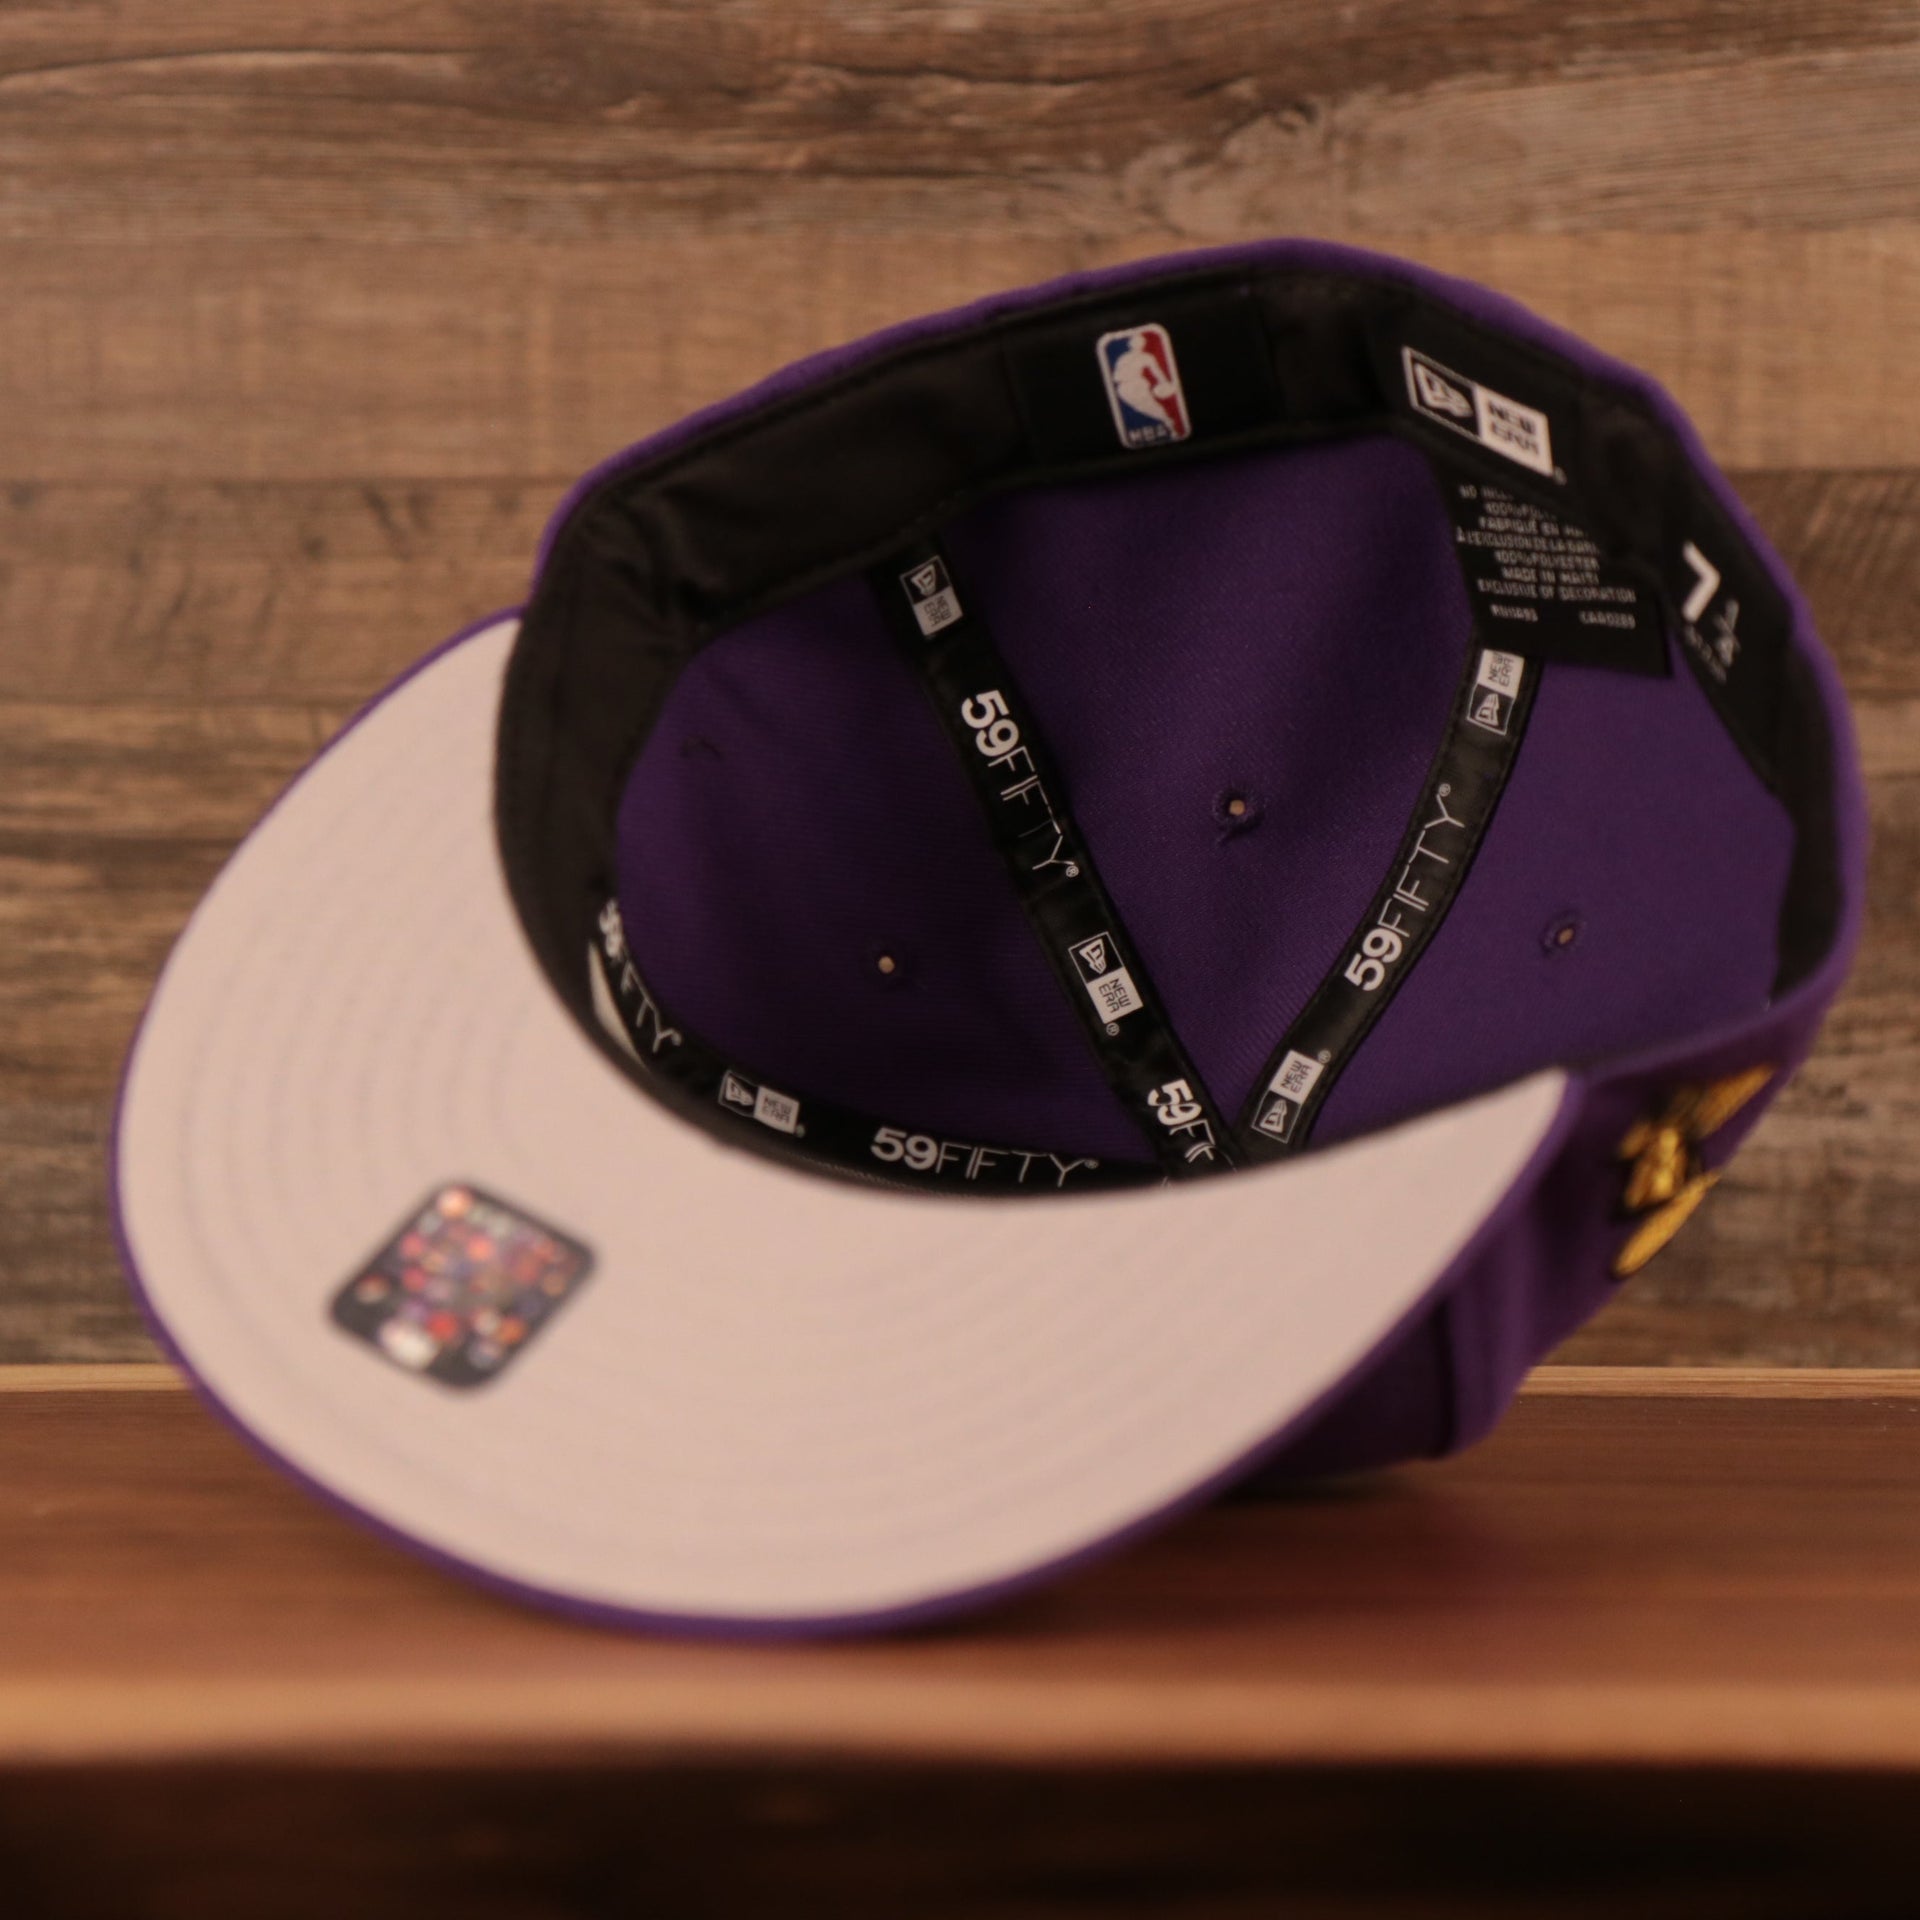 The grey bottom brim of the purple Los Angeles Lakers all over embroidered 59fifty cap by New Era.